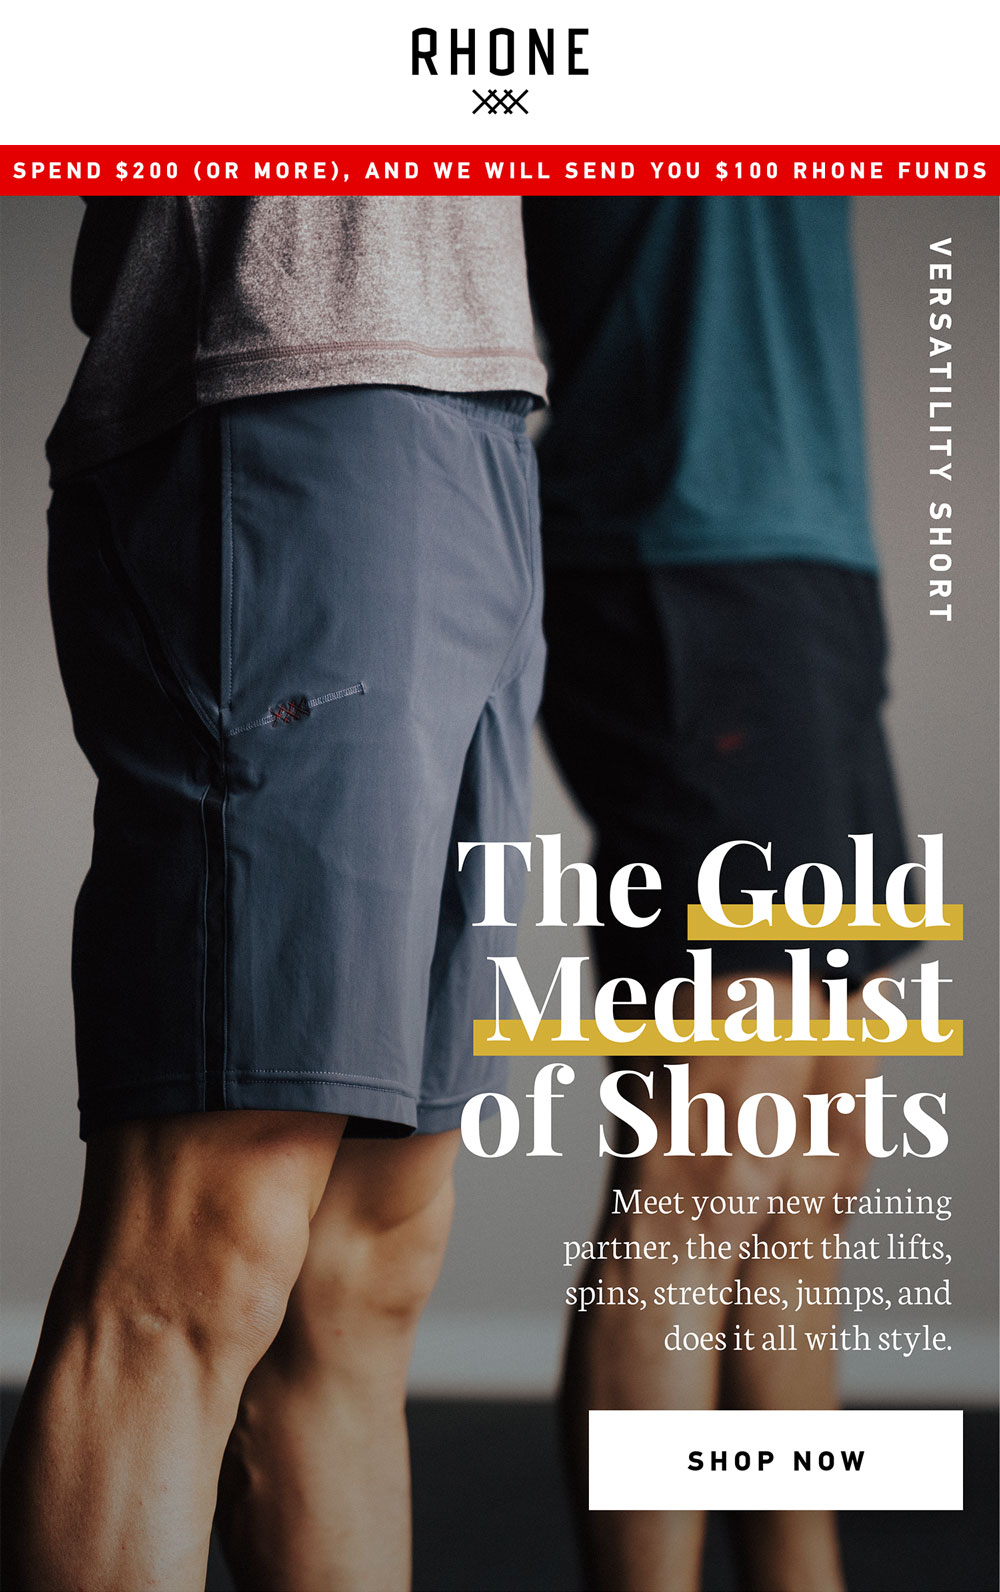 The Gold Medalist of Shorts